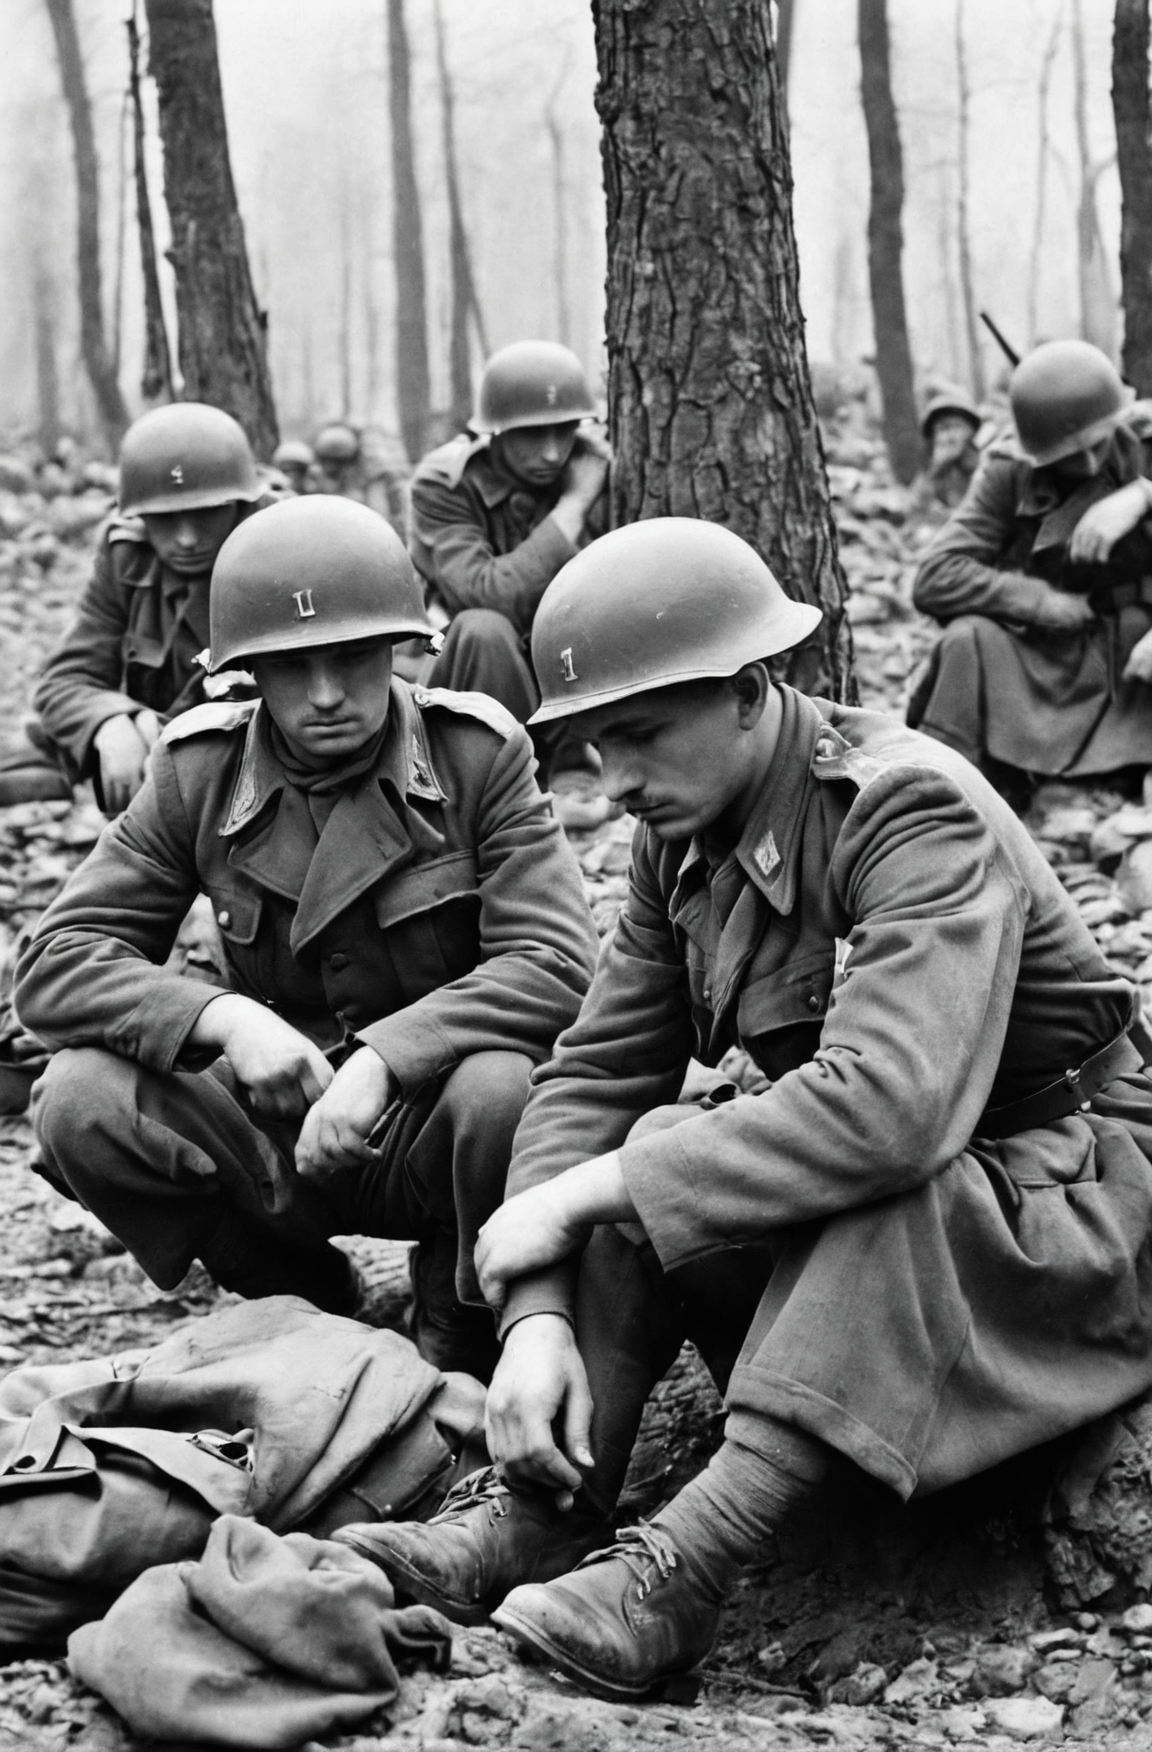 Sad soldiers in World War II, black and white photo